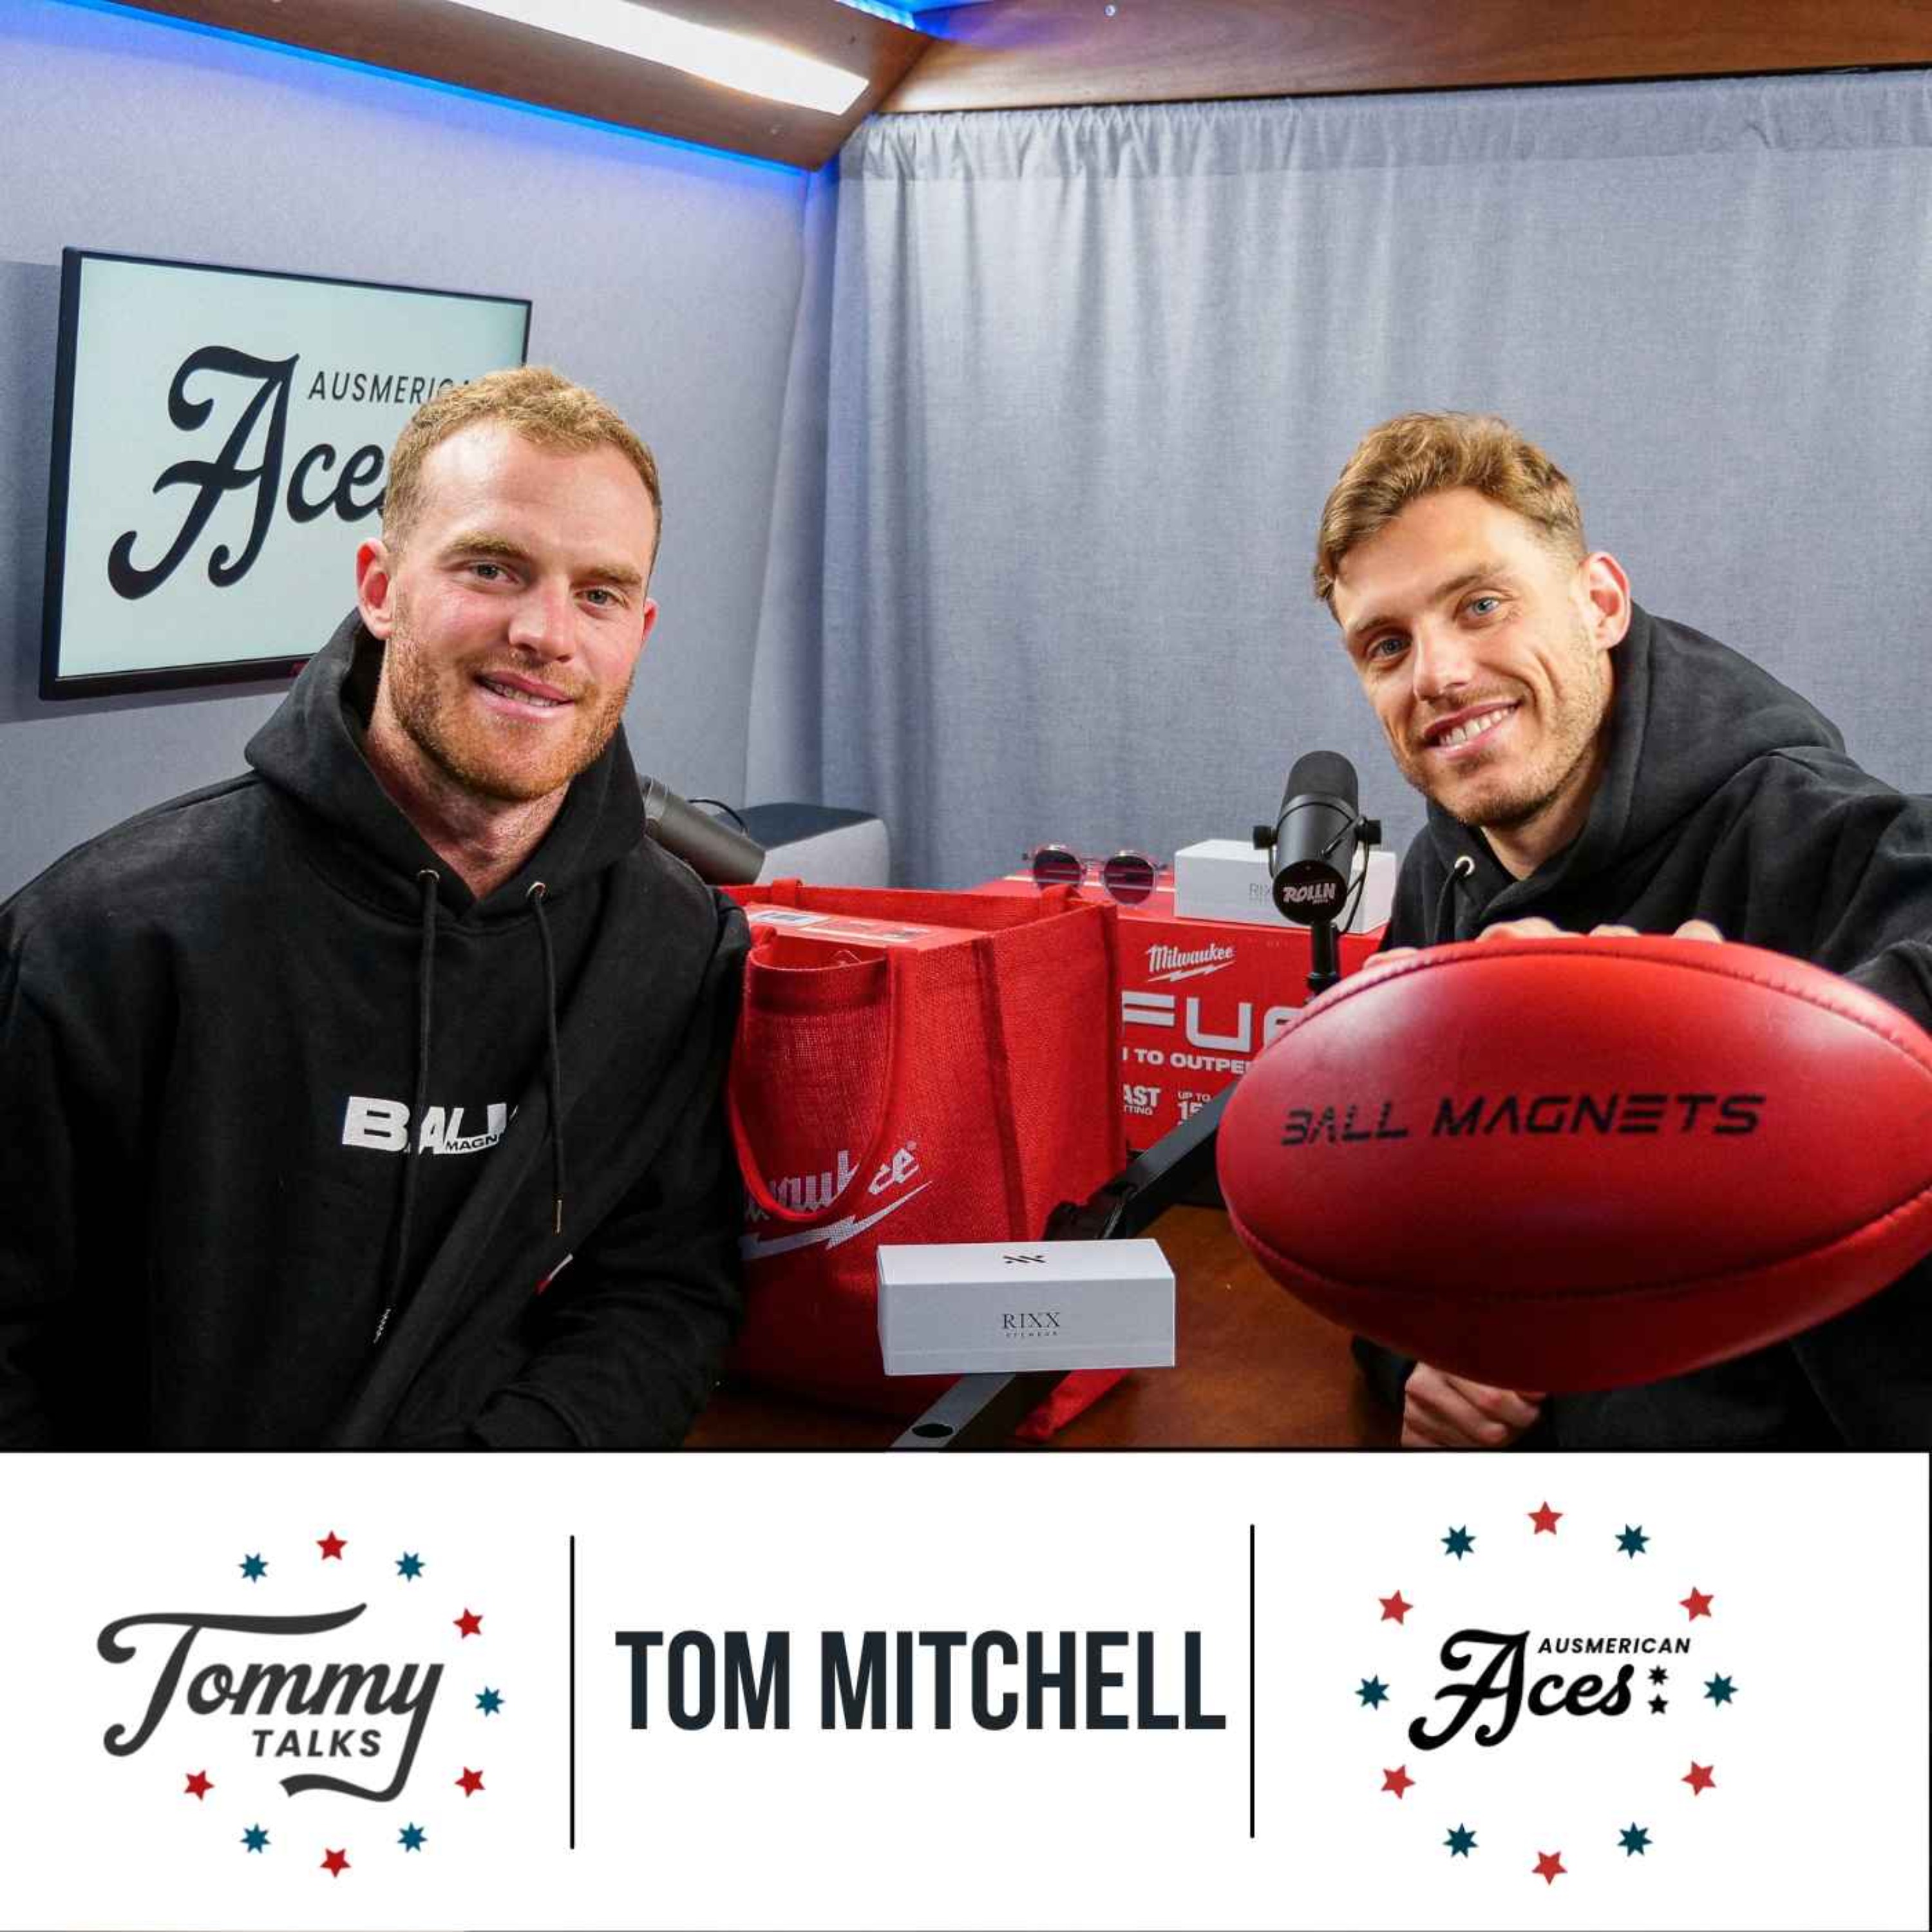 Tommy Talks with Tom Mitchell